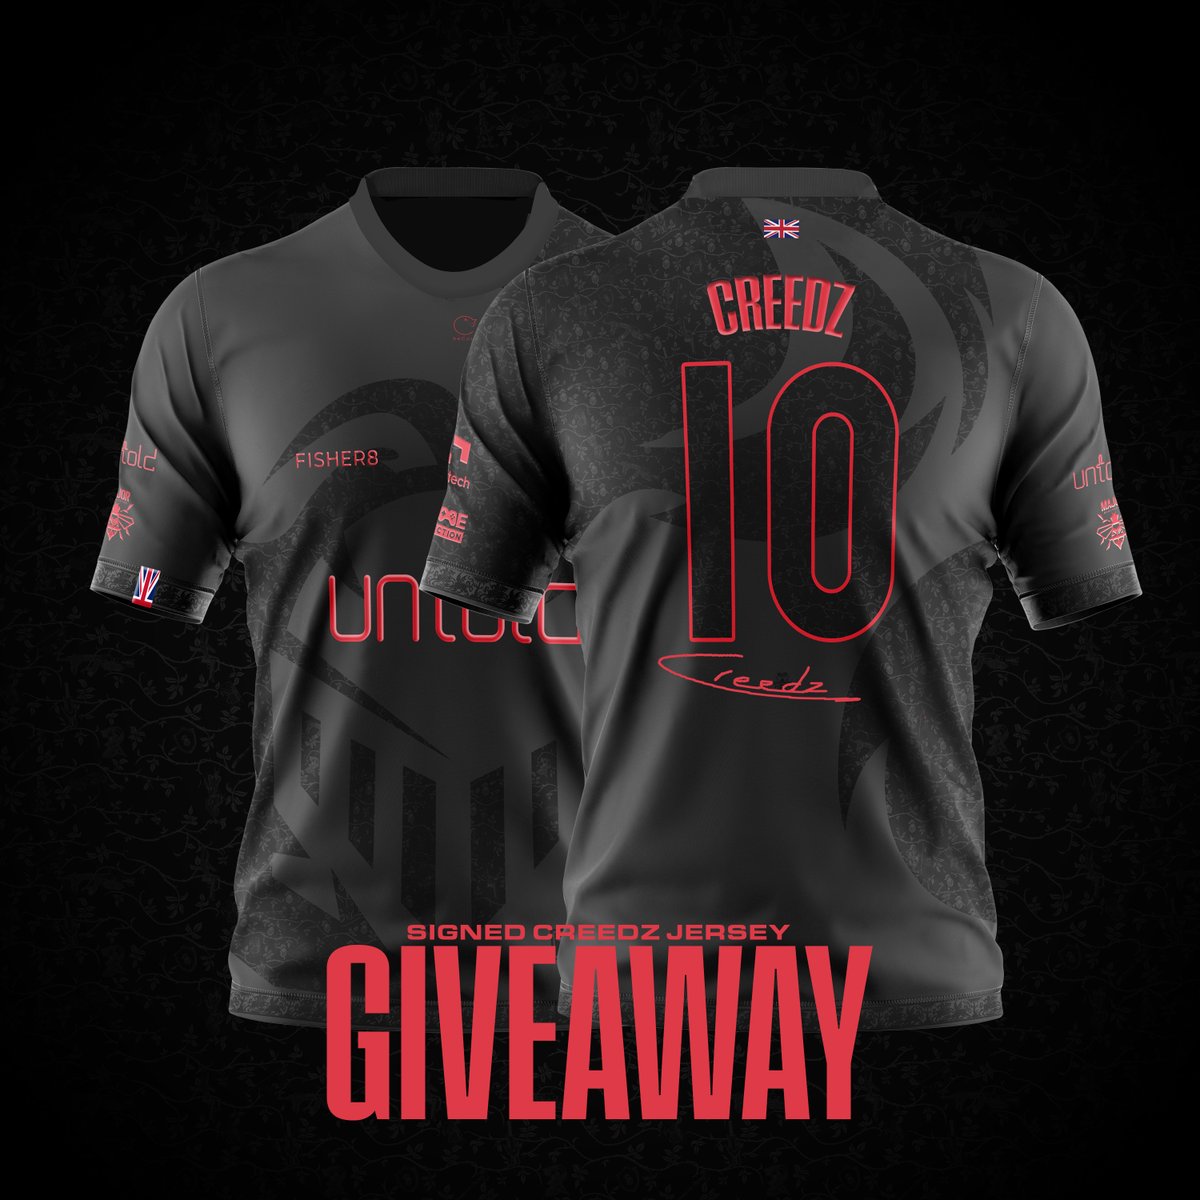 I am giving away a signed Limited Edition Manchester Major jersey 

To enter all you need to do is
- Like and retweet
- Follow me and @ITBesports 
- Tag 2 friends

The winner will be drawn on the 27th May🫡